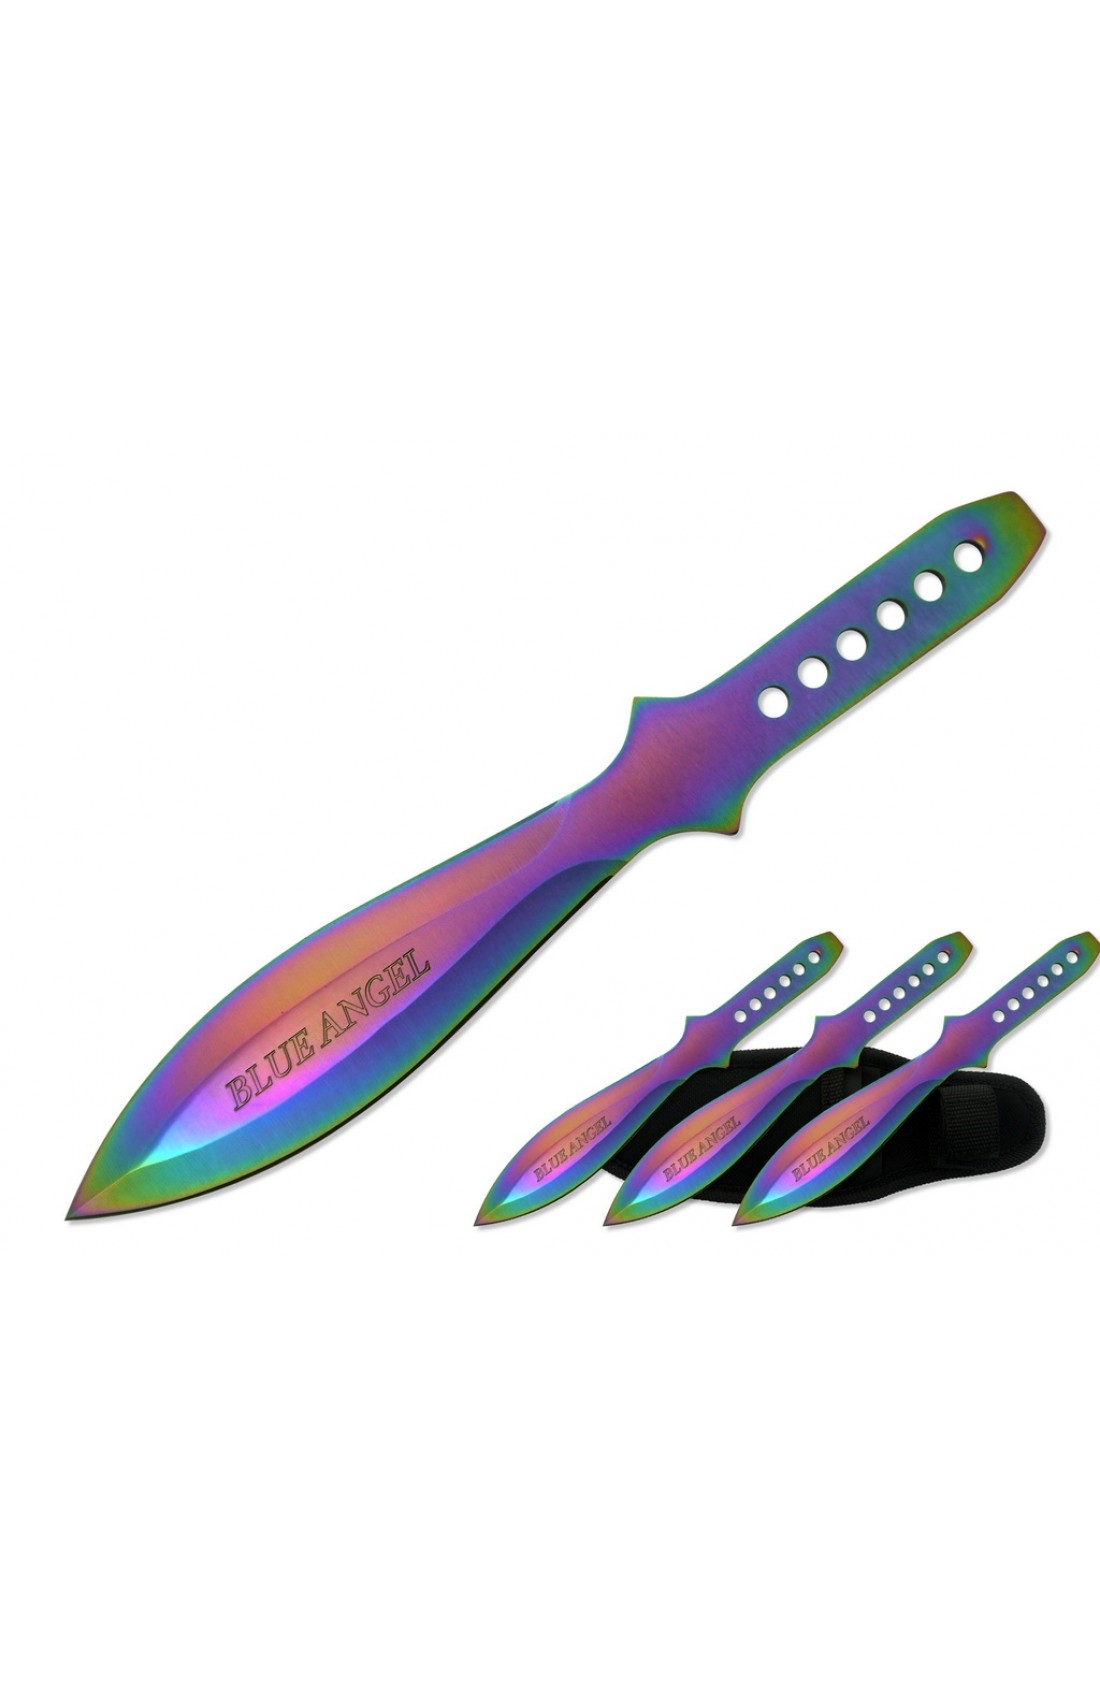 KNIFE - T00604 3pc Iridescent THROWING Knives 